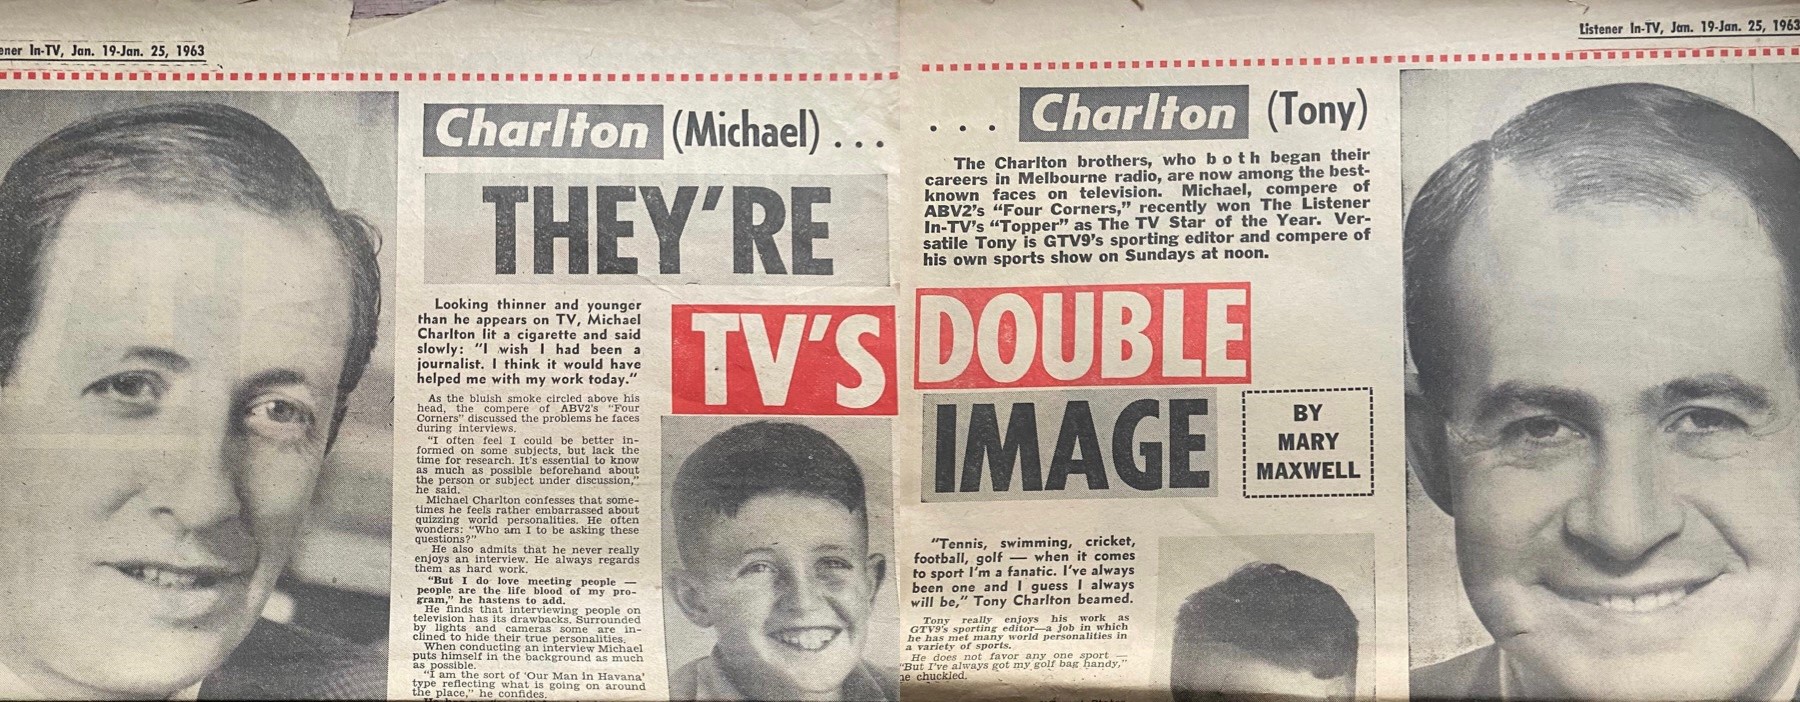 Old newspaper article with photos of Tony and Michael and headline They're TV's double image.